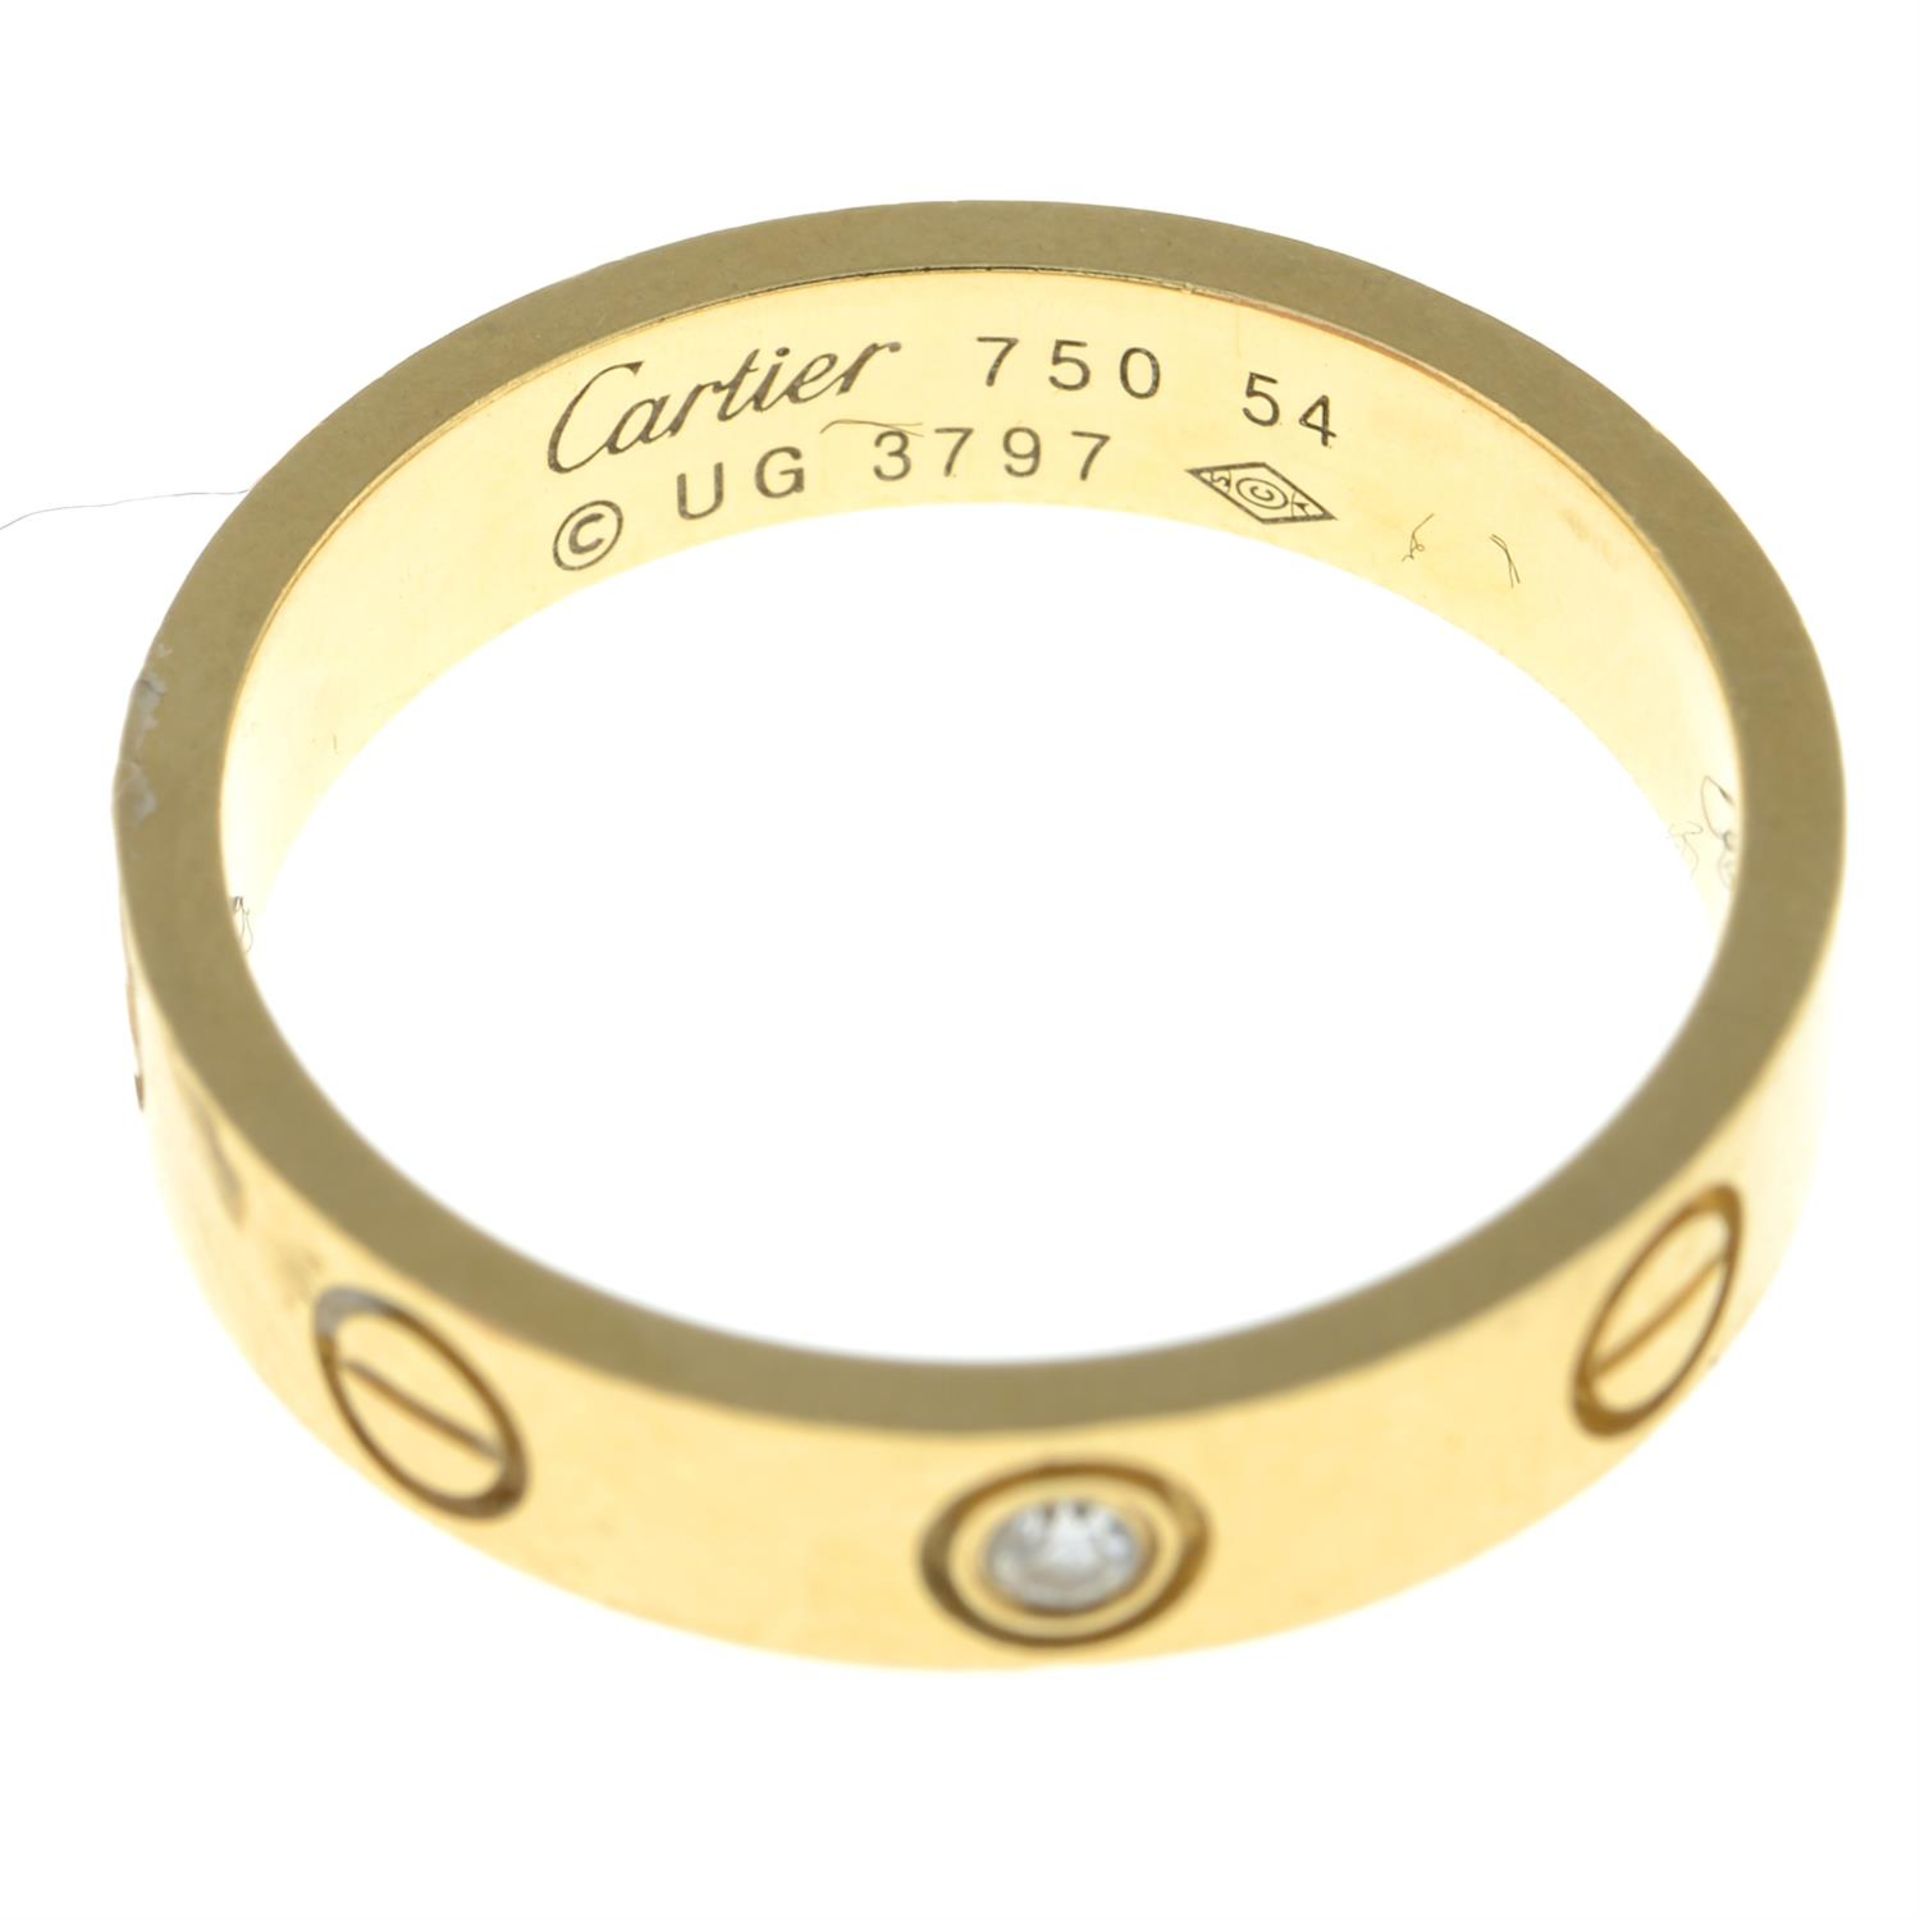 Diamond accent 'Love' ring, by Cartier - Image 2 of 2